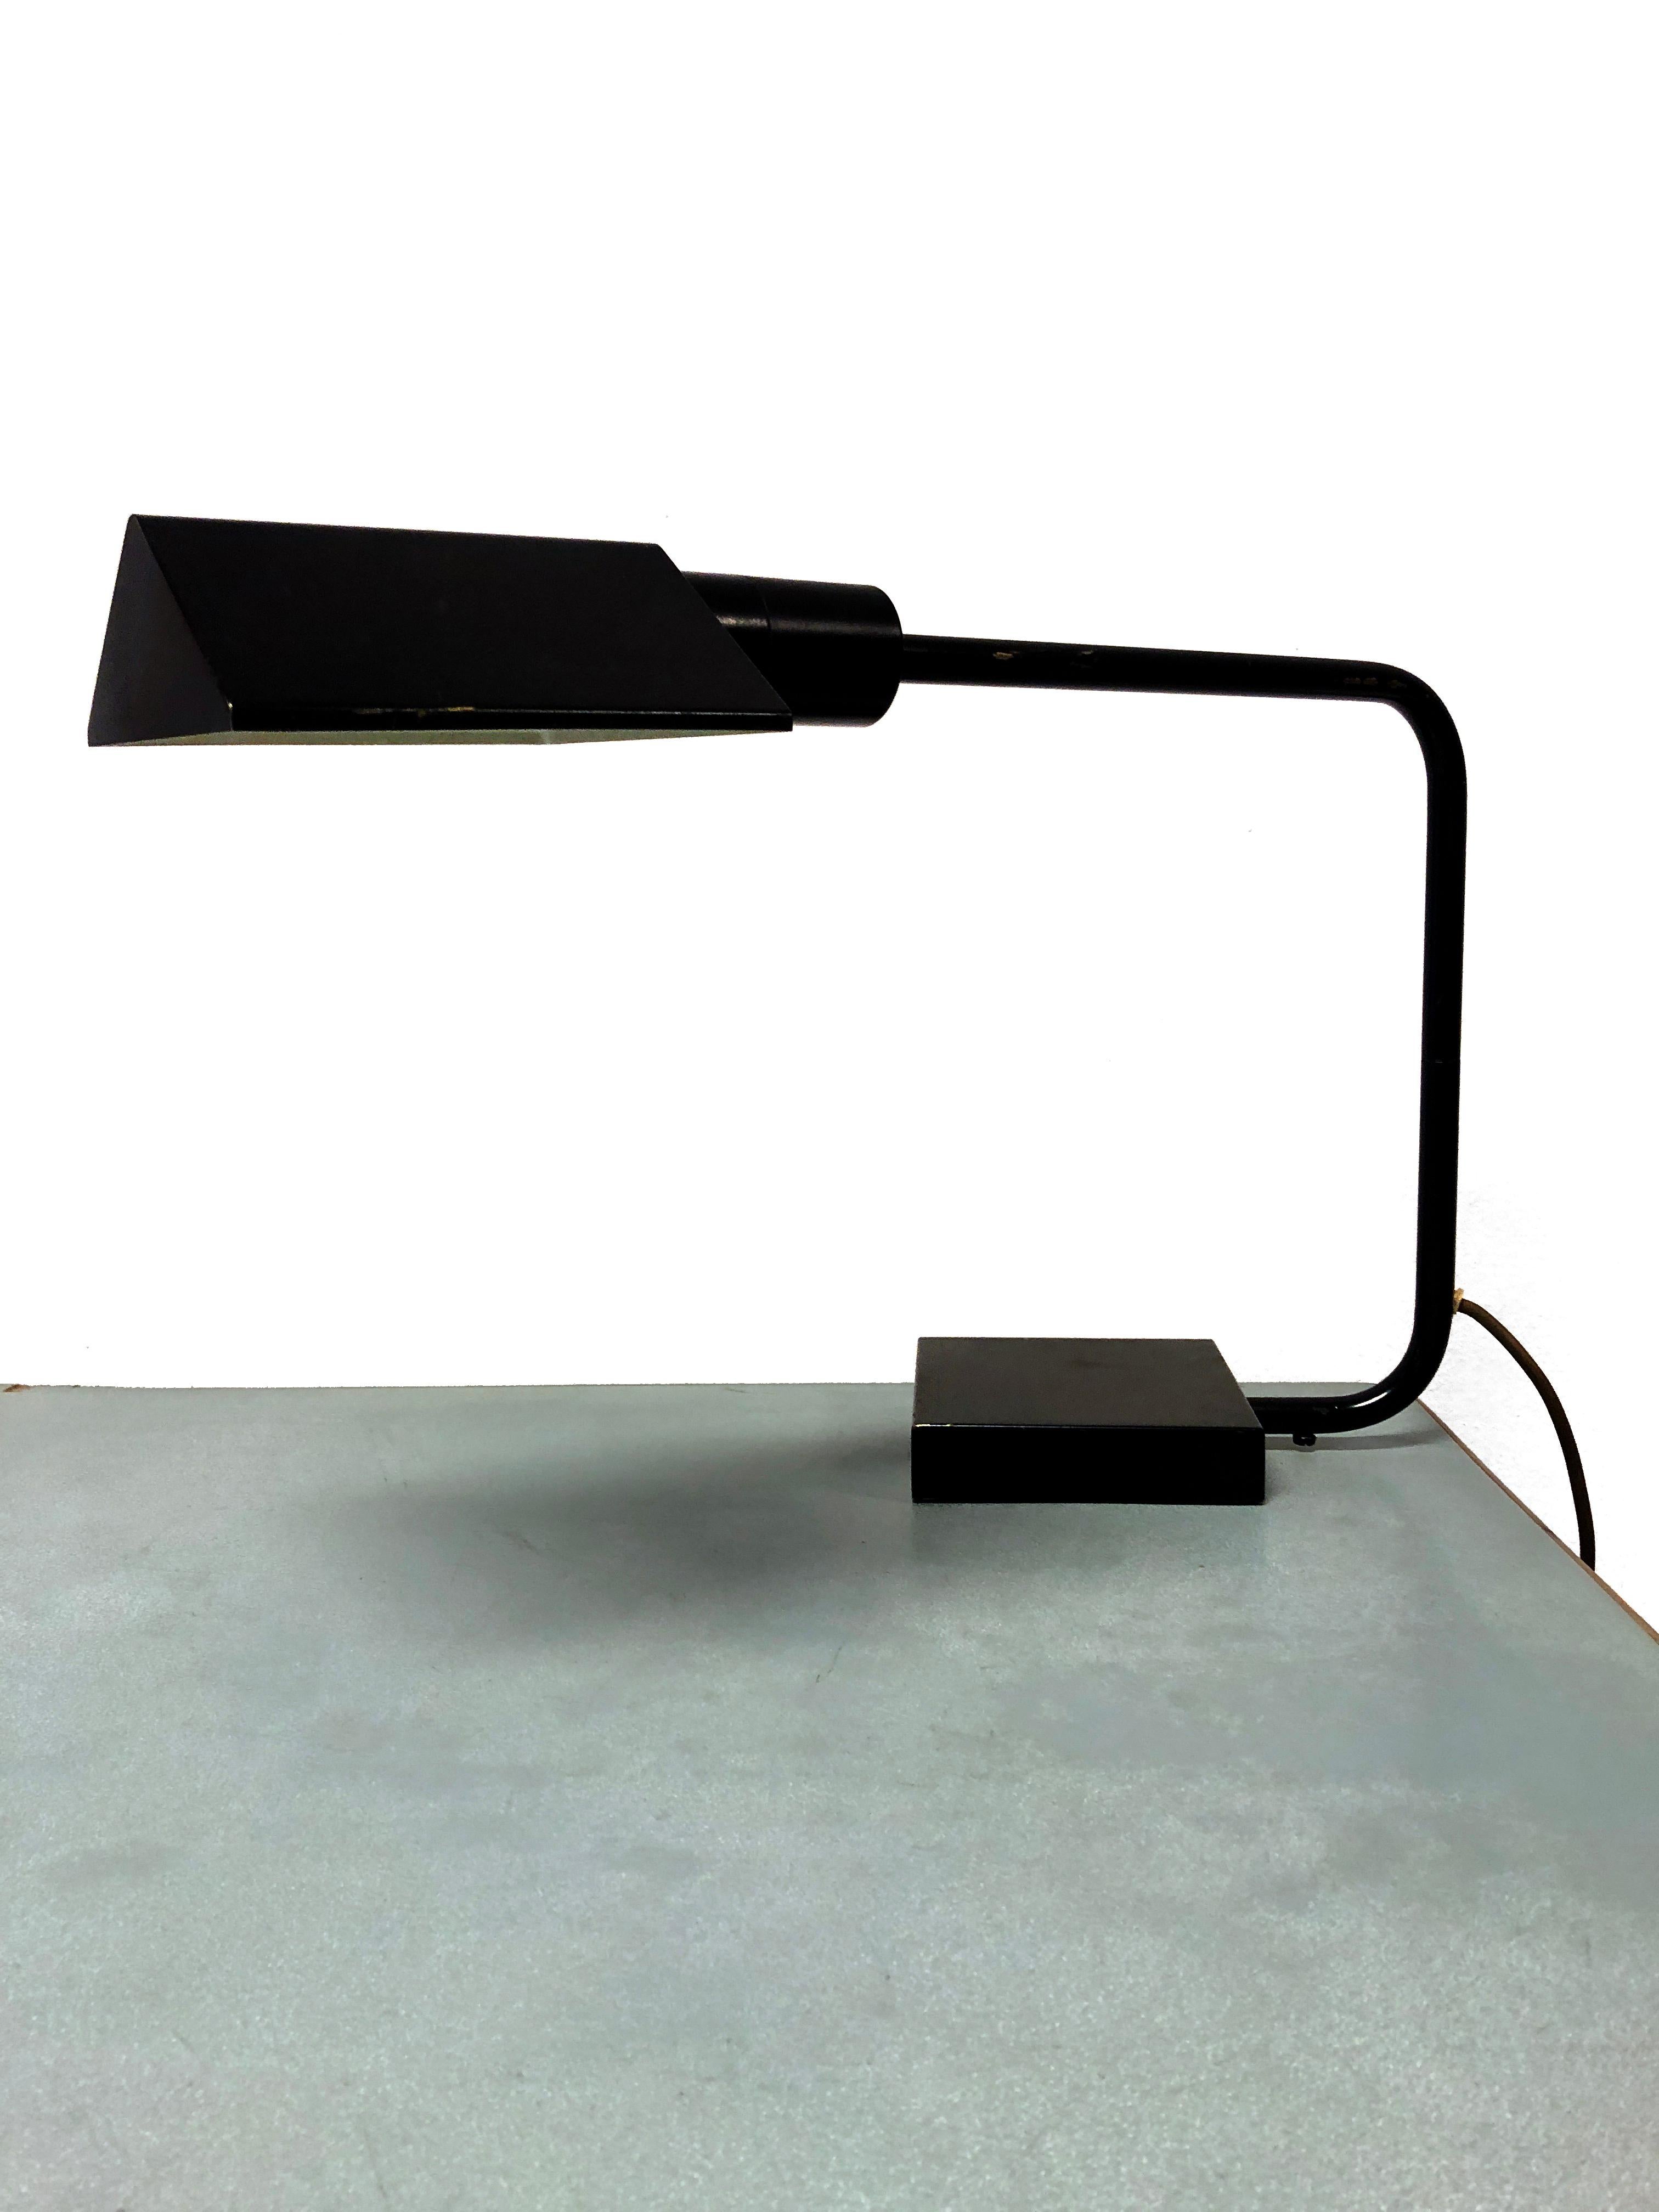 A black powder-coated brass lamp, with swing arm, with heavy base. Style attribute to Koch and Lowy.
* The cable of this item may be original and might need replacement, if not specified otherwise.